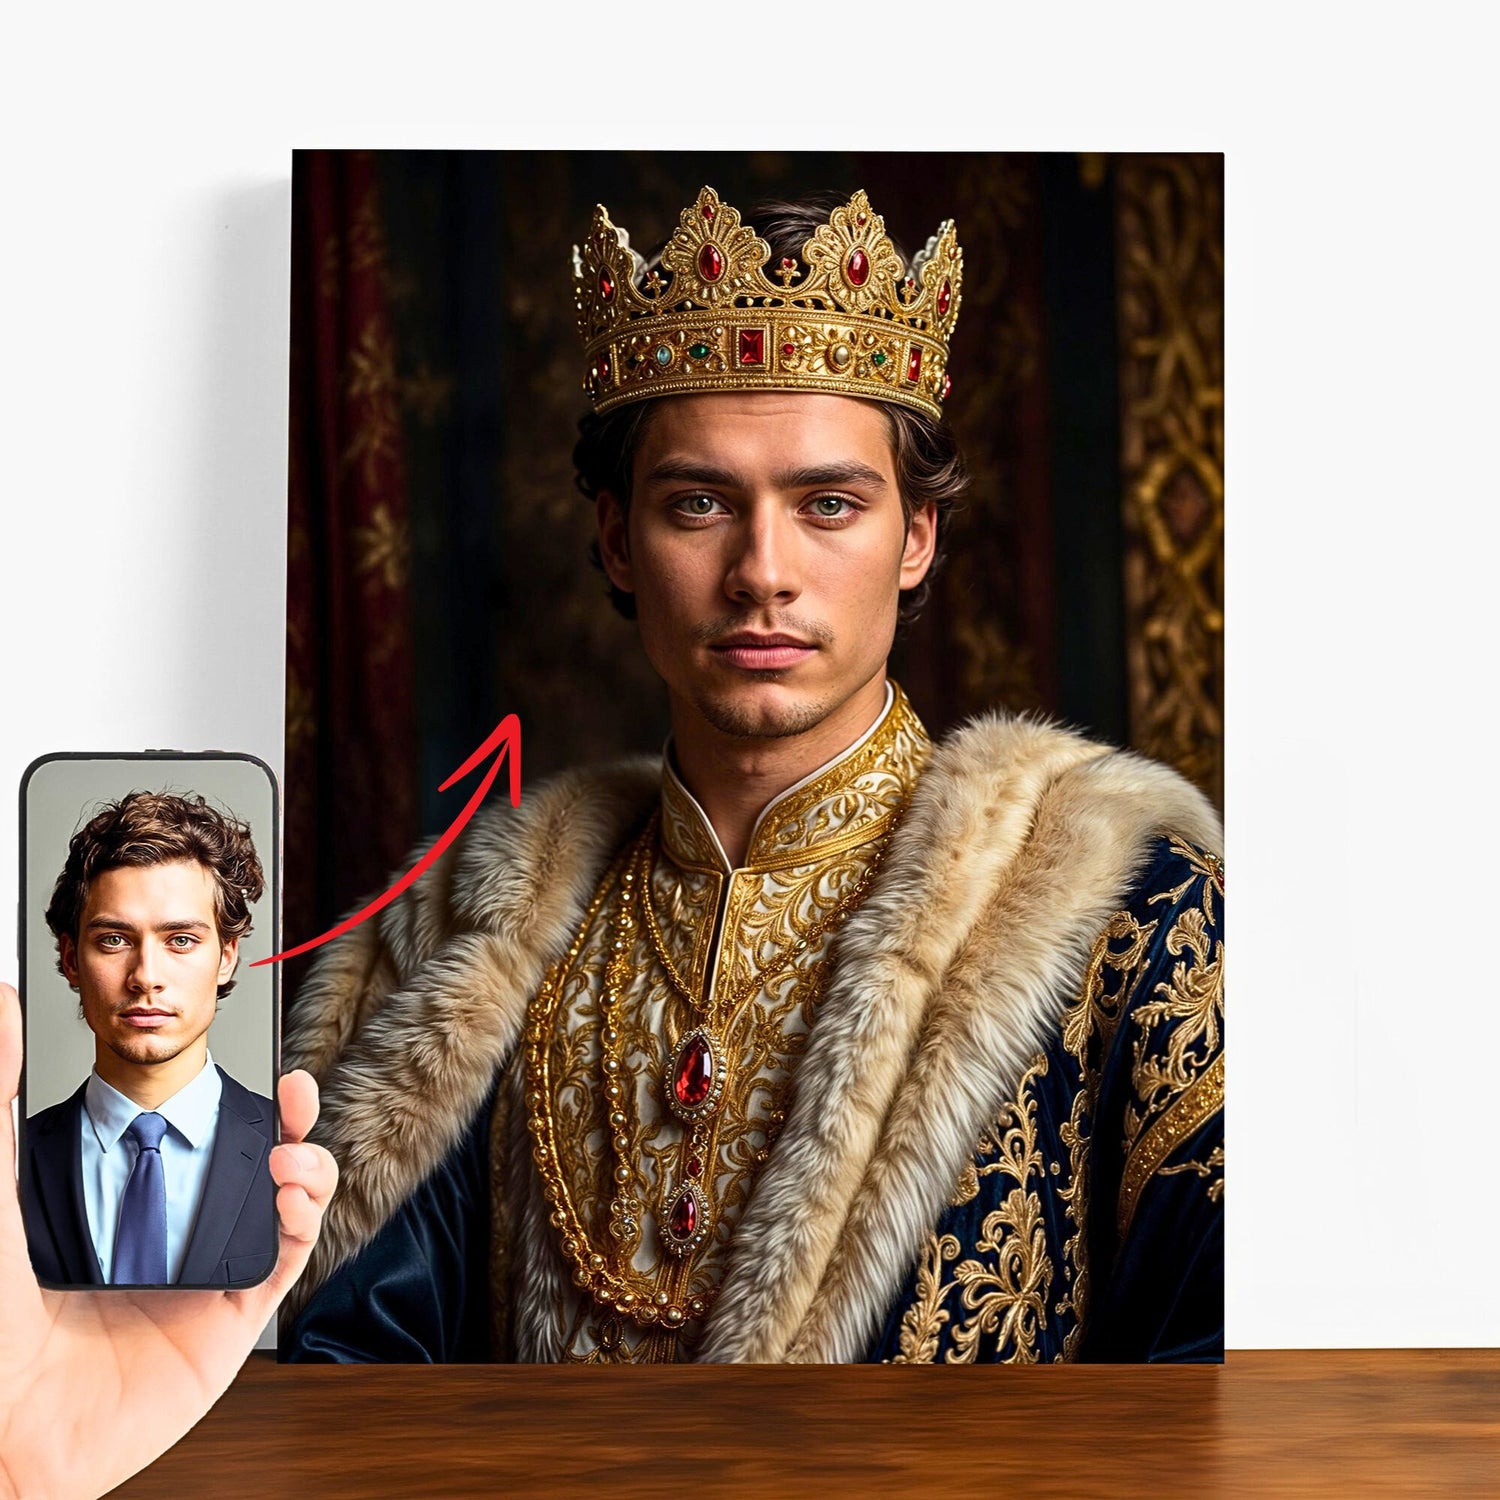 Personalized Royal Prince Portrait from Photo  Renaissance Portrait  Custom King Portrait  Gift for him  Father's Day Gift